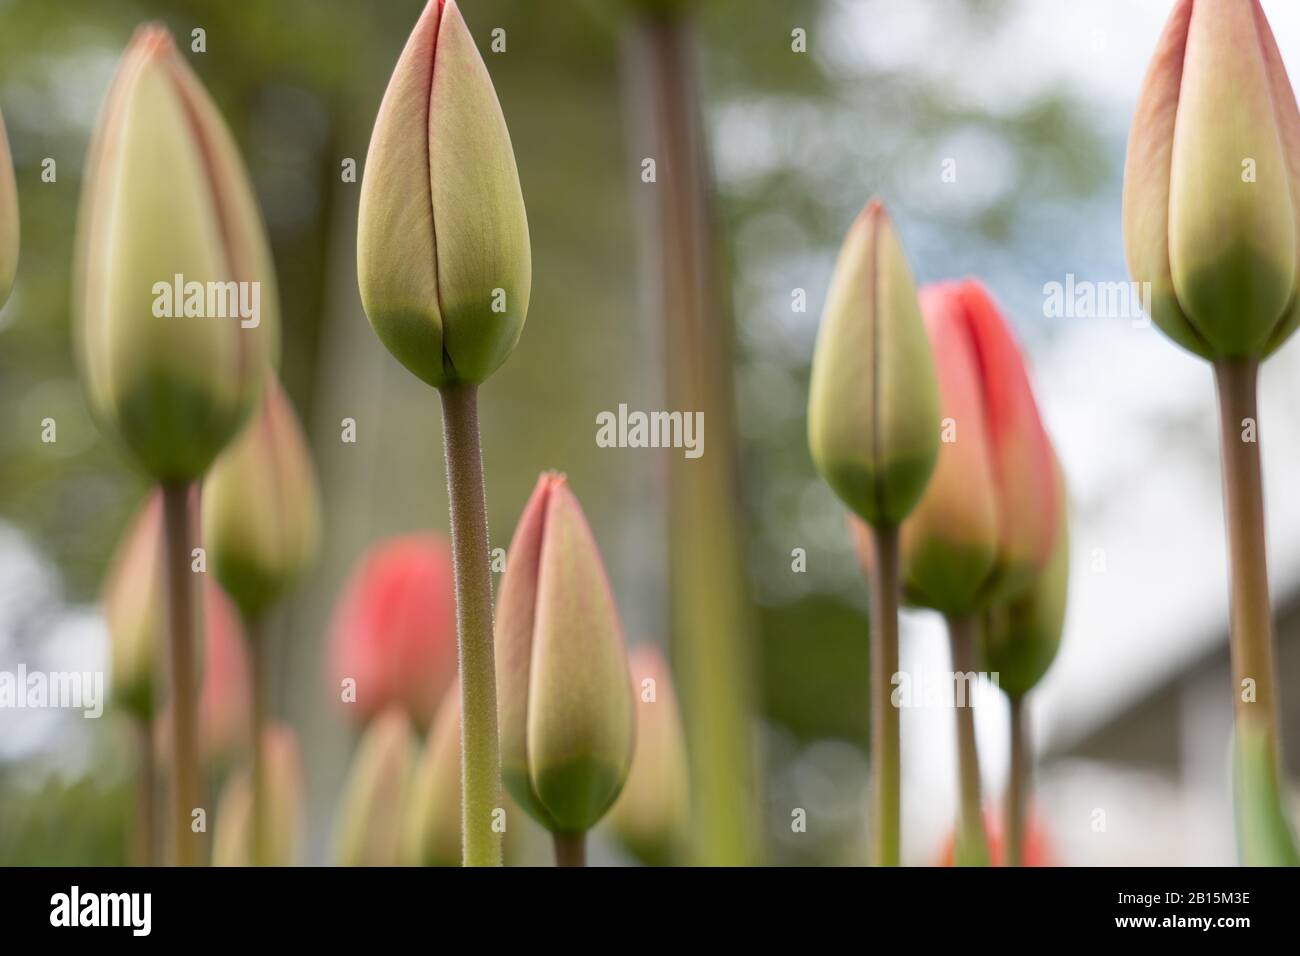 Red closed tulips in young life stage of blossoming at sunny spring day with blurred background at cloudy sky. Focus on foreground, close-up, selectiv Stock Photo